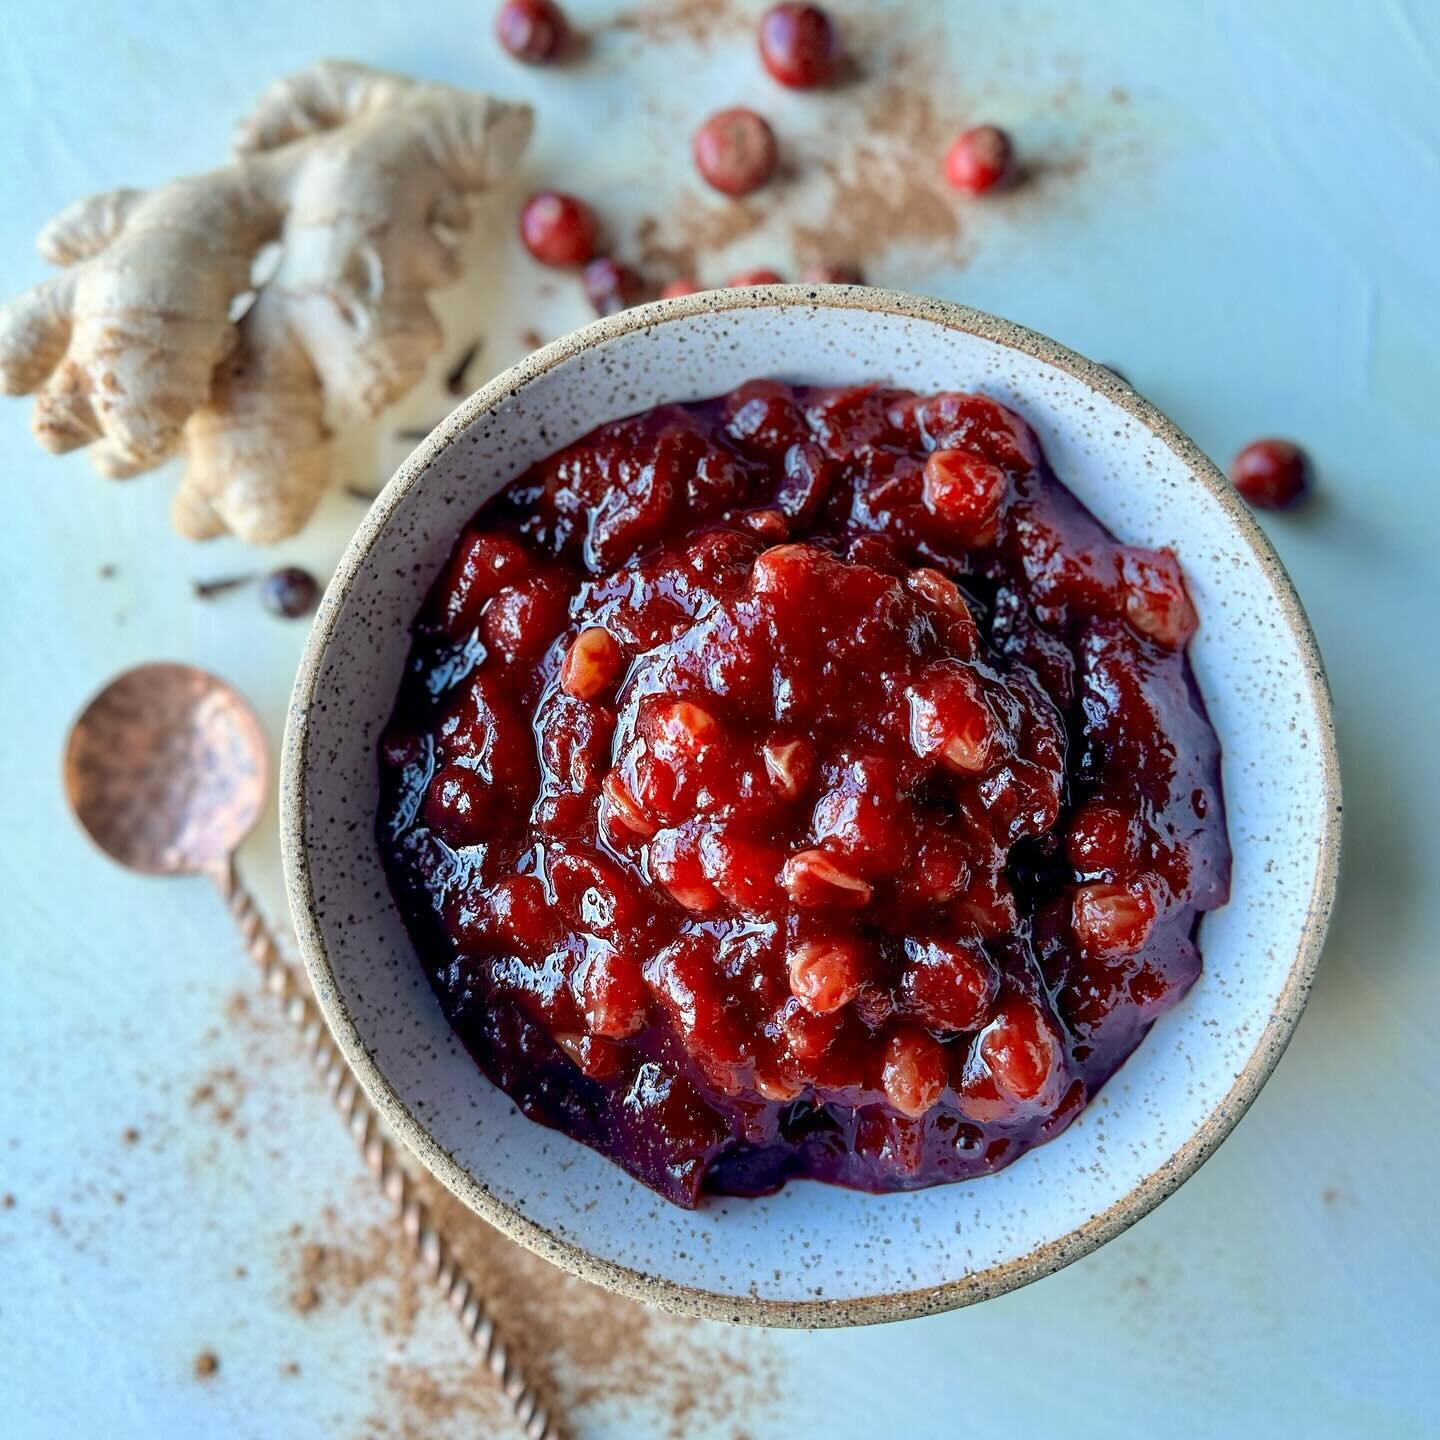 What do you get when you combine the tartness of fresh cranberries with the sweetness of golden raisins, and the warmth of baking spices? Holiday Cranberry Chutney! We challenge you not to fall in love with this version of the popular holiday dressin